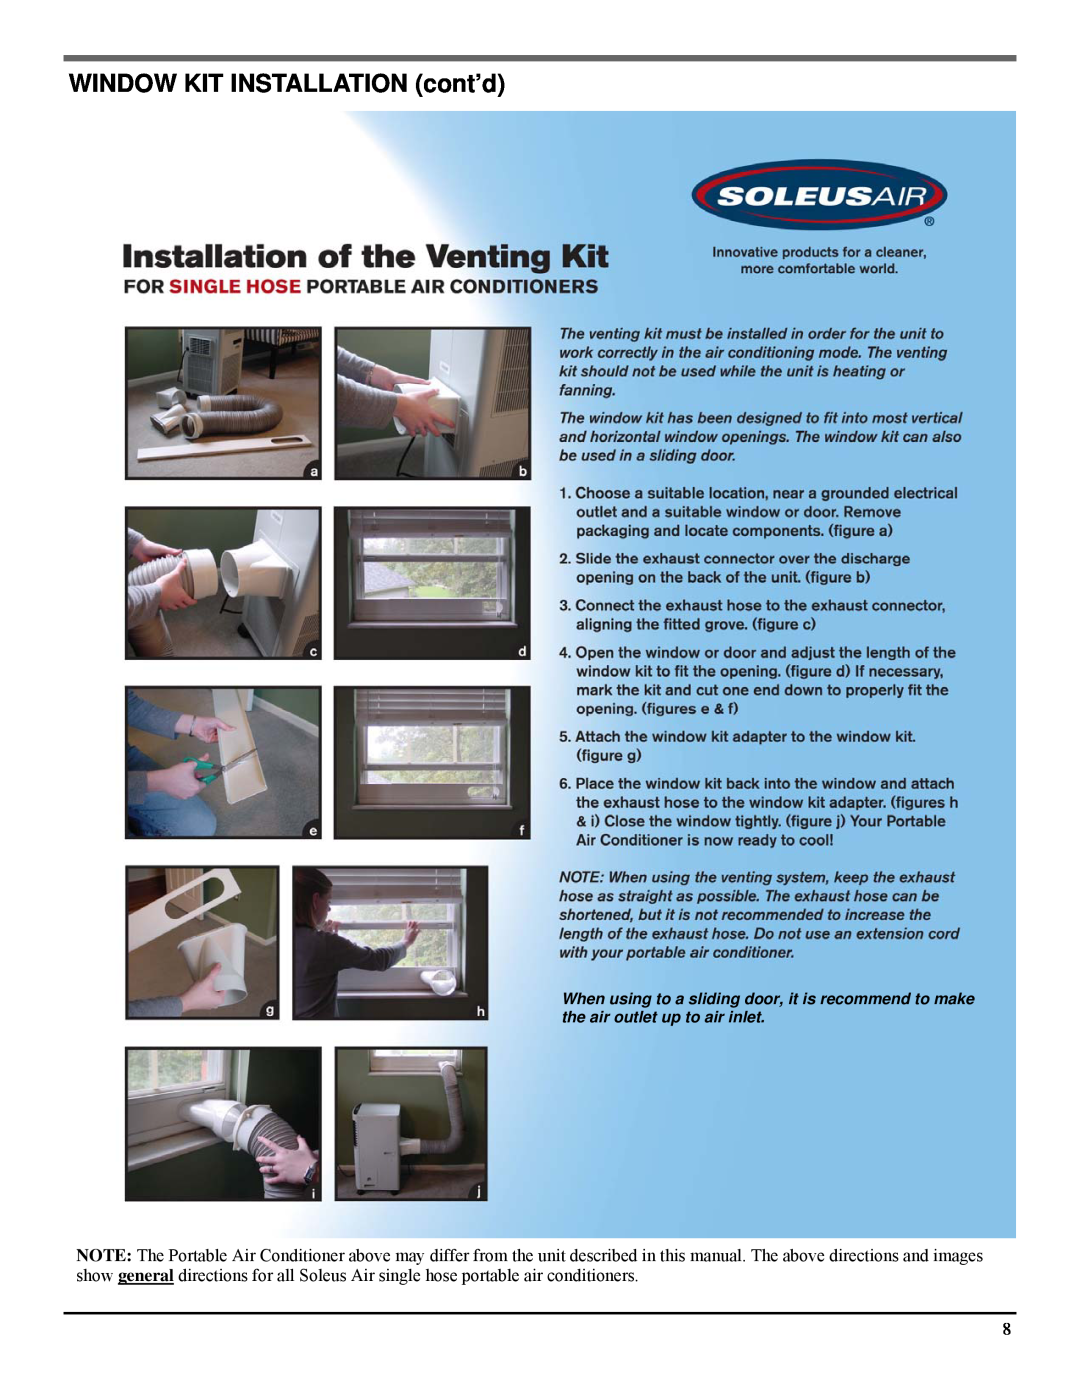 Soleus Air PH-3-12R-03 operating instructions WINDOW KIT INSTALLATION cont’d 